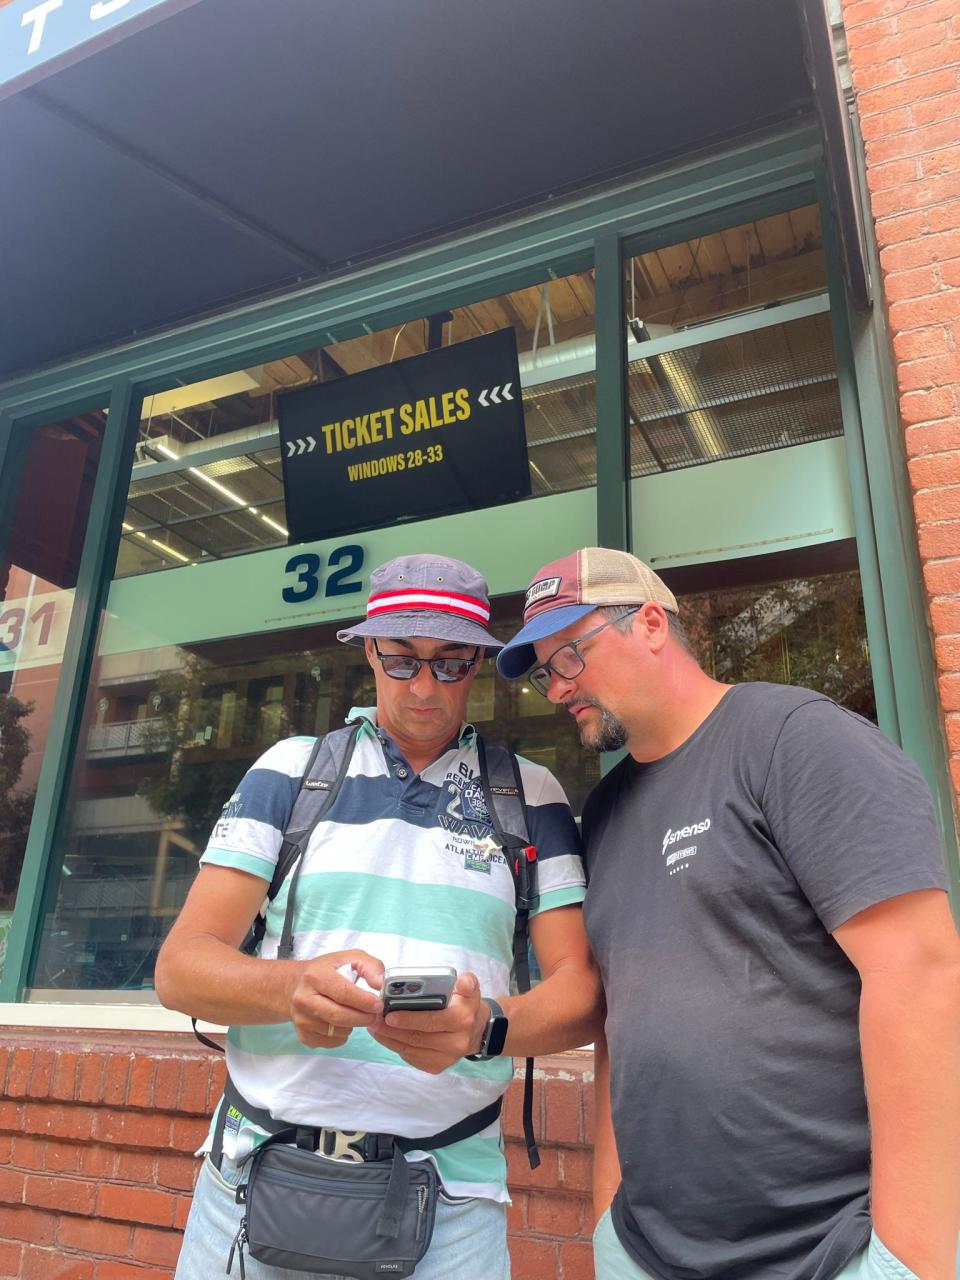 Marcus Dihlmann, left, and Marco De Tullio look at Dihlmann's smartphone after he purchased electronic tickets from the San Diego Padres ticket office in late August.